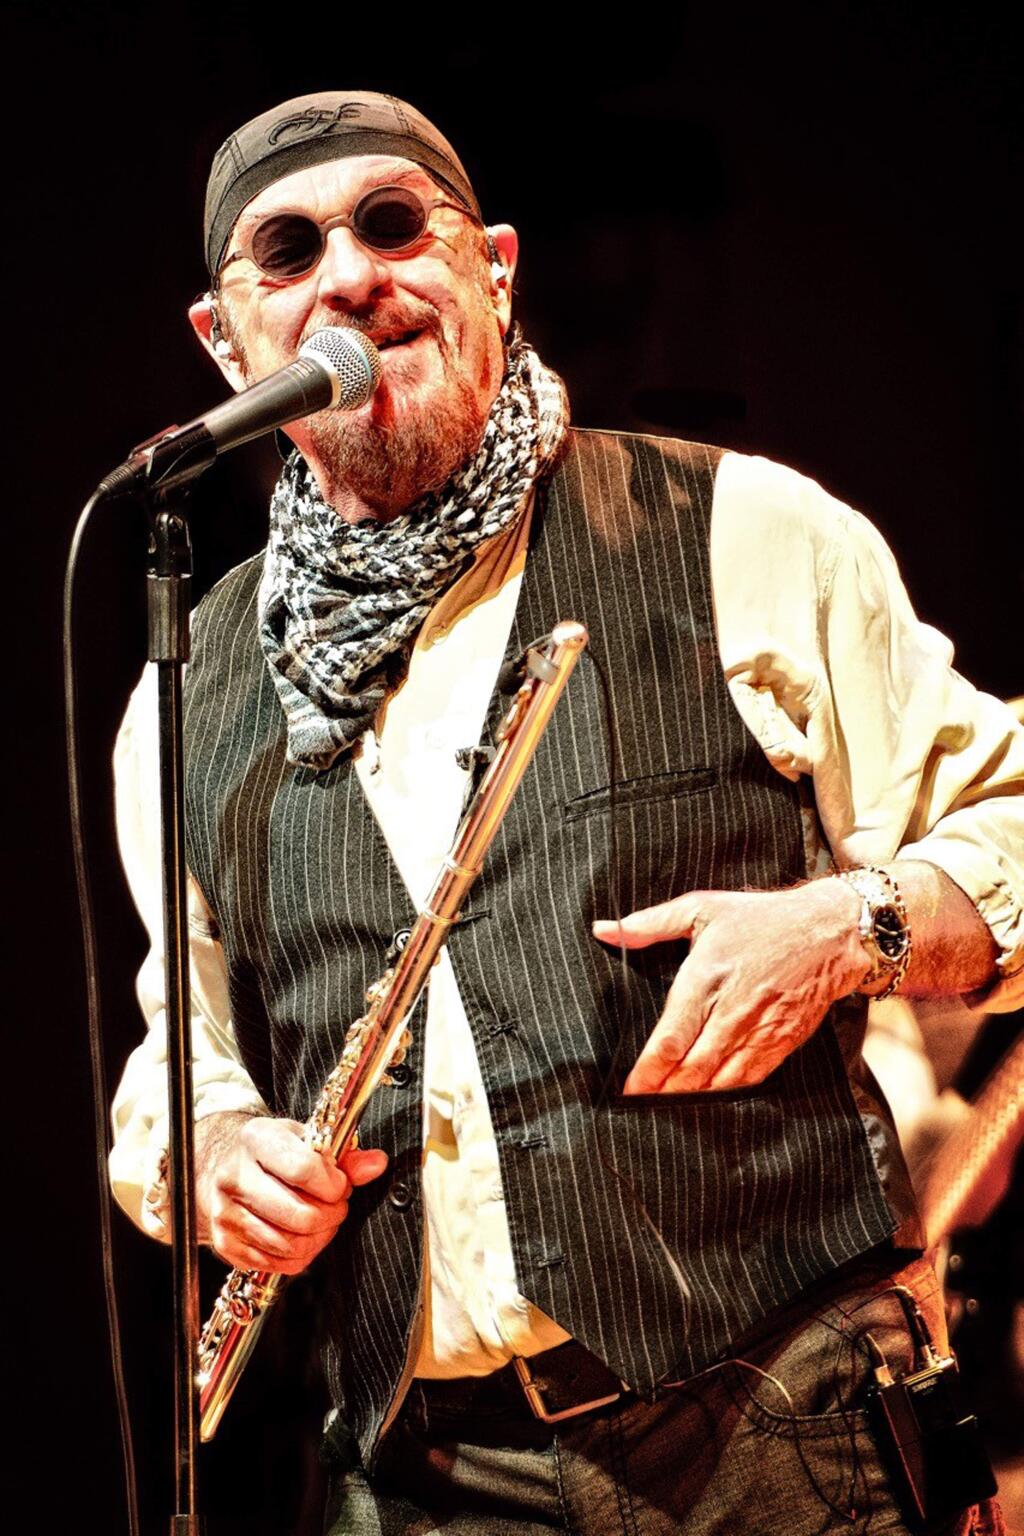 Ian Anderson, musician, singer, songwriter and multi-instrumentalist best known for his work as the lead vocalist, flautist and acoustic guitarist of British rock band Jethro Tull. (Photo by Nick Harrison)